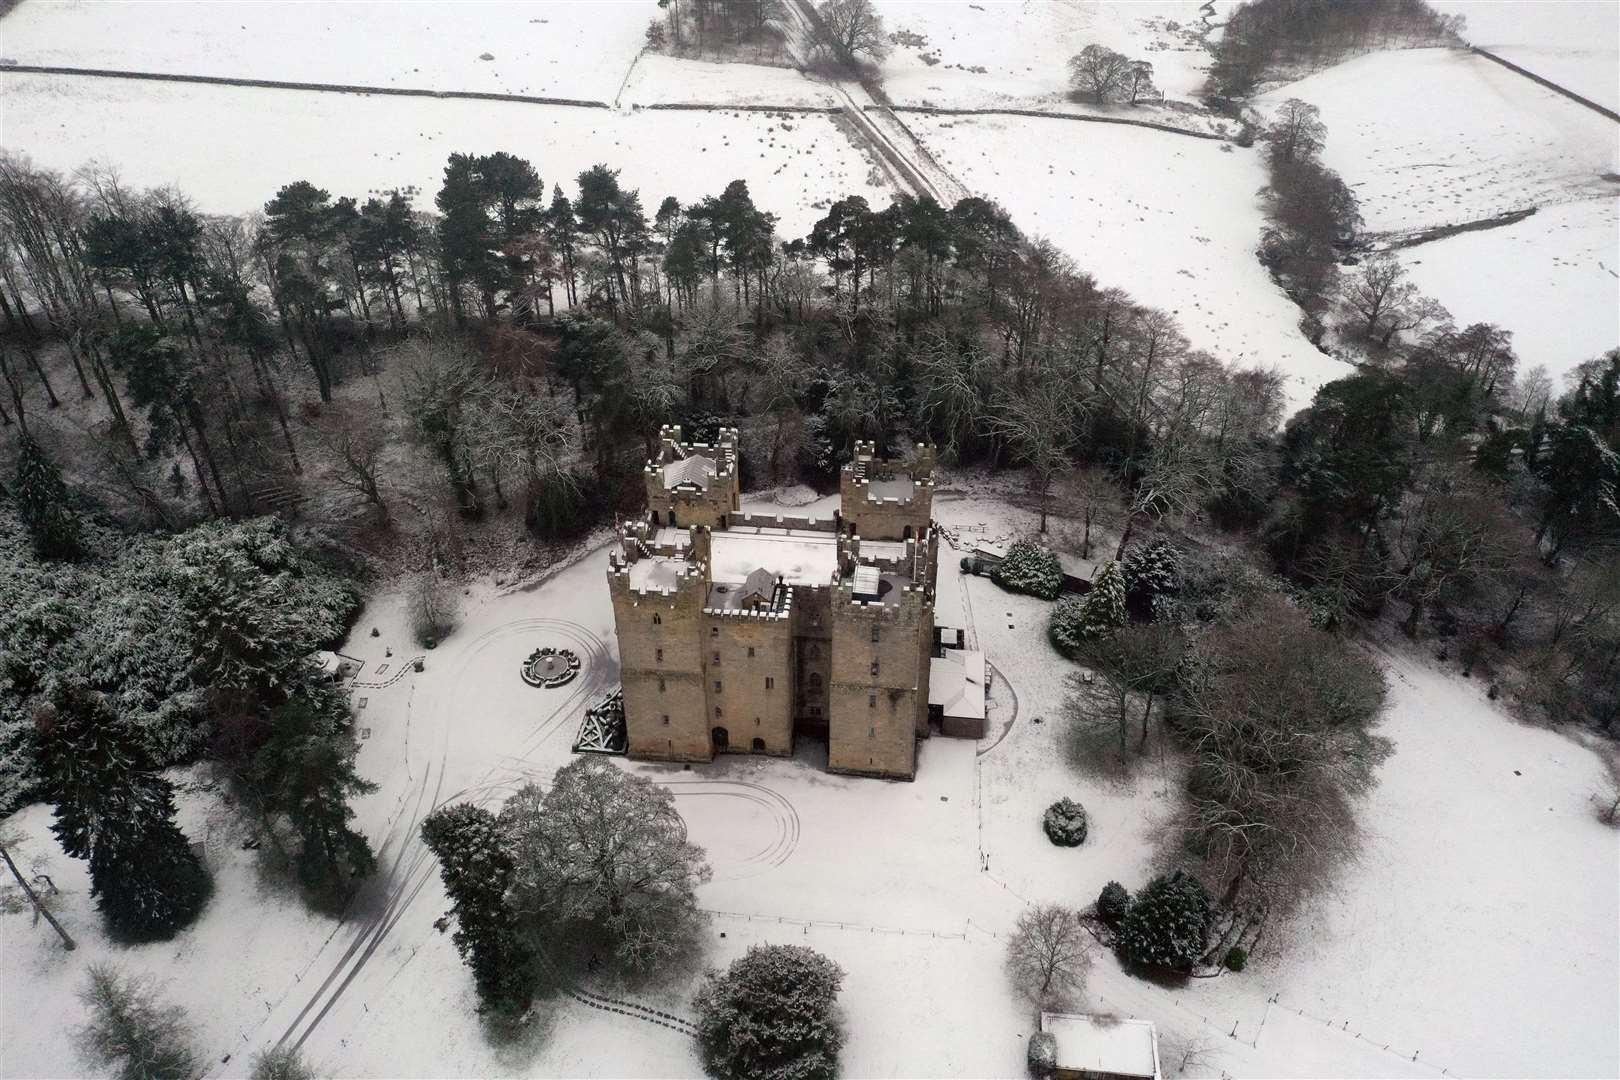 Snow covers the grounds surrounding Langley Castle Hotel near Haydon Bridge, Northumberland, a medieval tower house built in the 14th century (Owen Humphreys/PA)